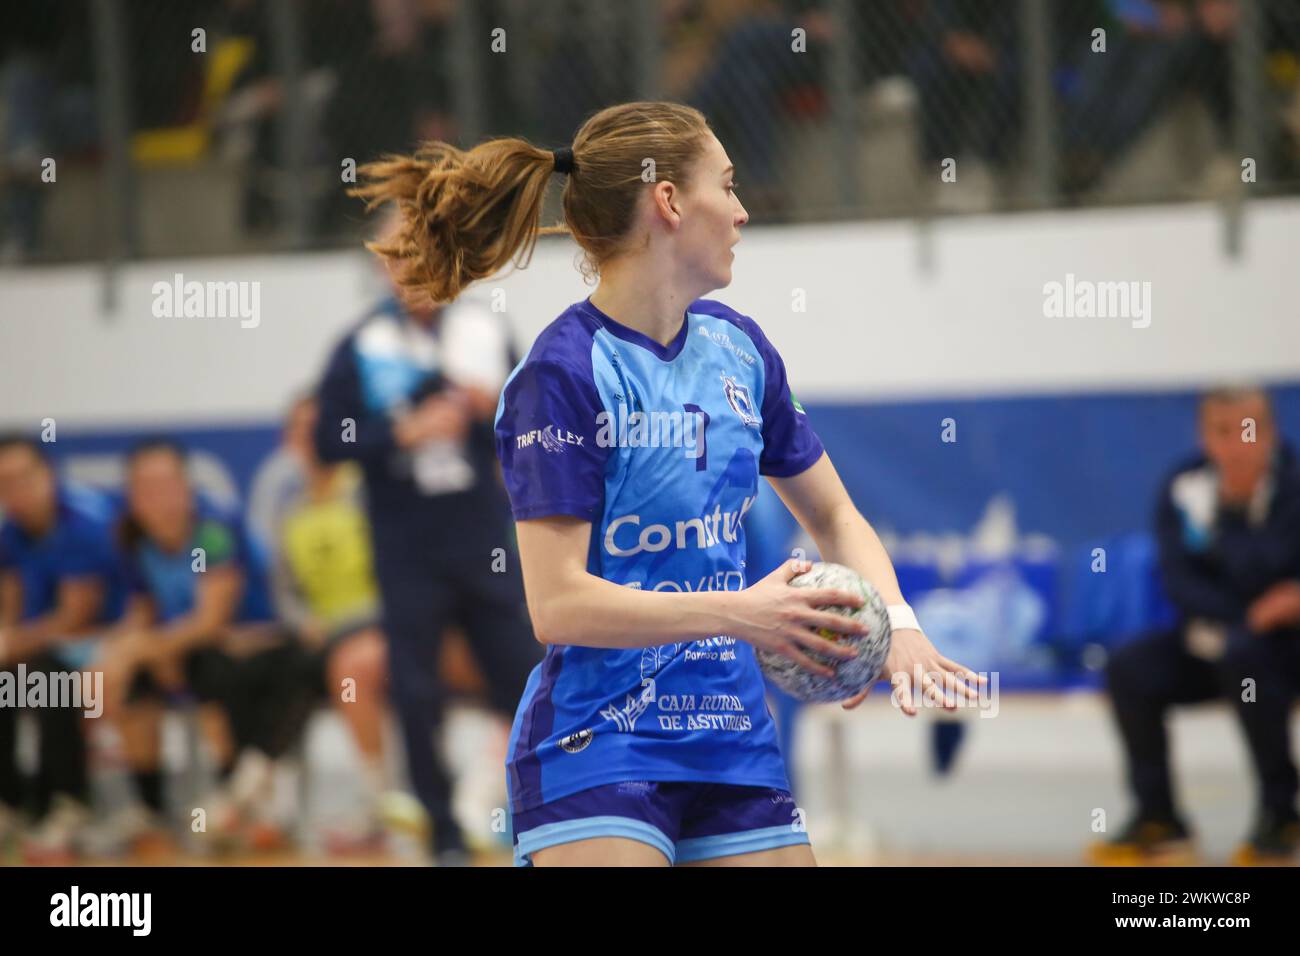 Oviedo, Spain, 22th February 2024: The player of Lobas Global Atac Oviedo, Miriam Cortina (7) with the ball during the 19th matchday of the Liga Guerreras Iberdrola 2023-24 between Lobas Global Atac Oviedo and Replasa Beti-Onak, the February 22, 2023, at the Florida Arena Municipal Sports Center, in Oviedo, Spain. Credit: Alberto Brevers / Alamy Live News. Stock Photo